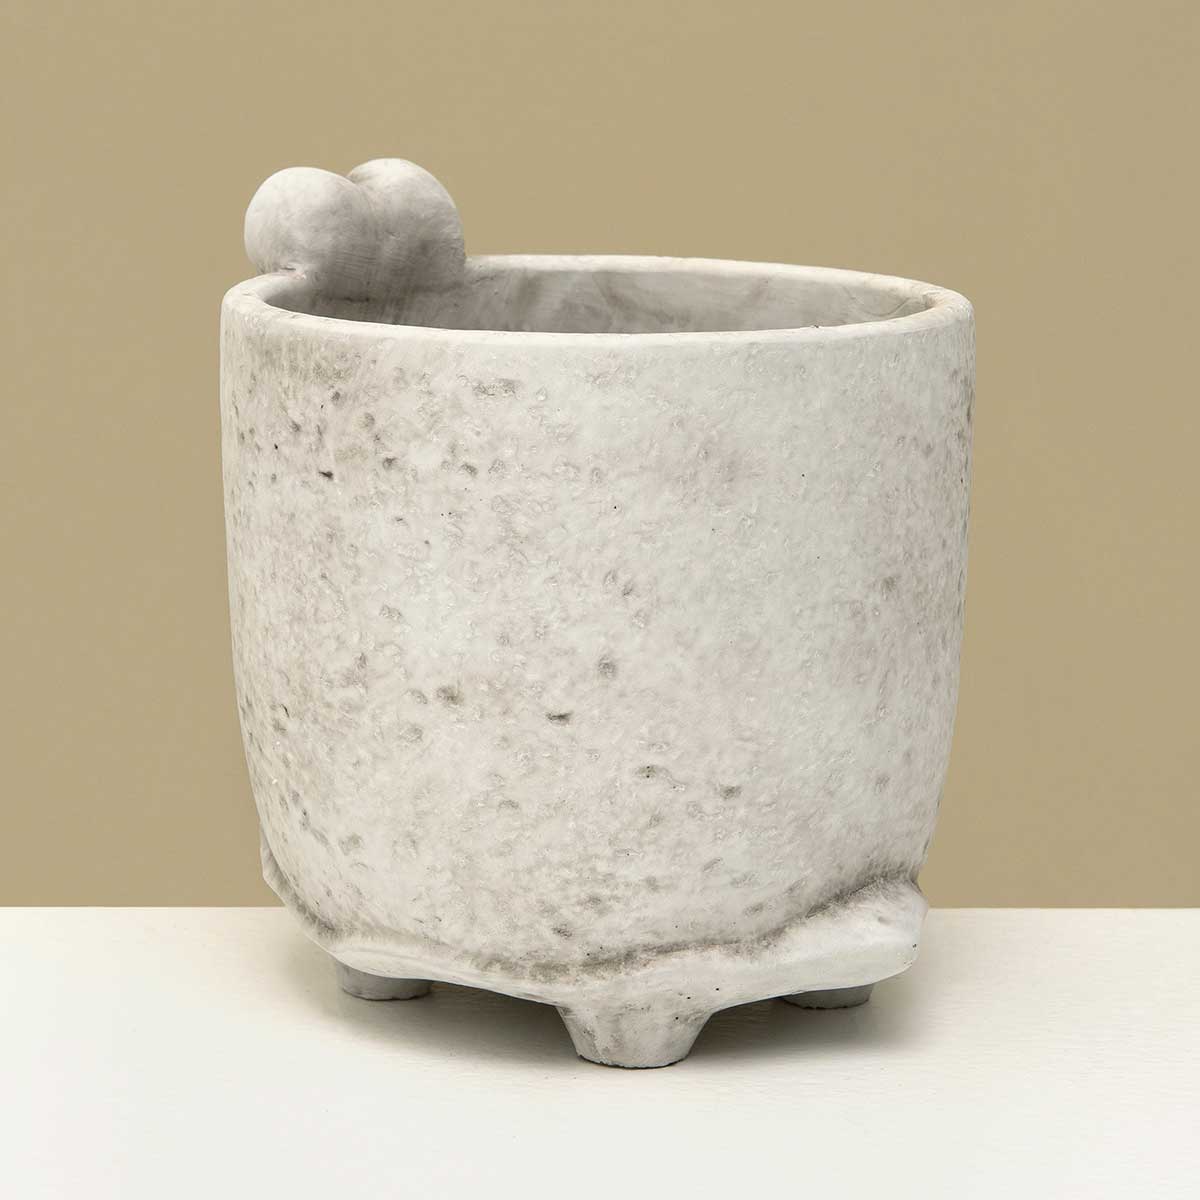 POT SNAIL 4.75IN X 4.5IN GREY WASH CONCRETE - Click Image to Close